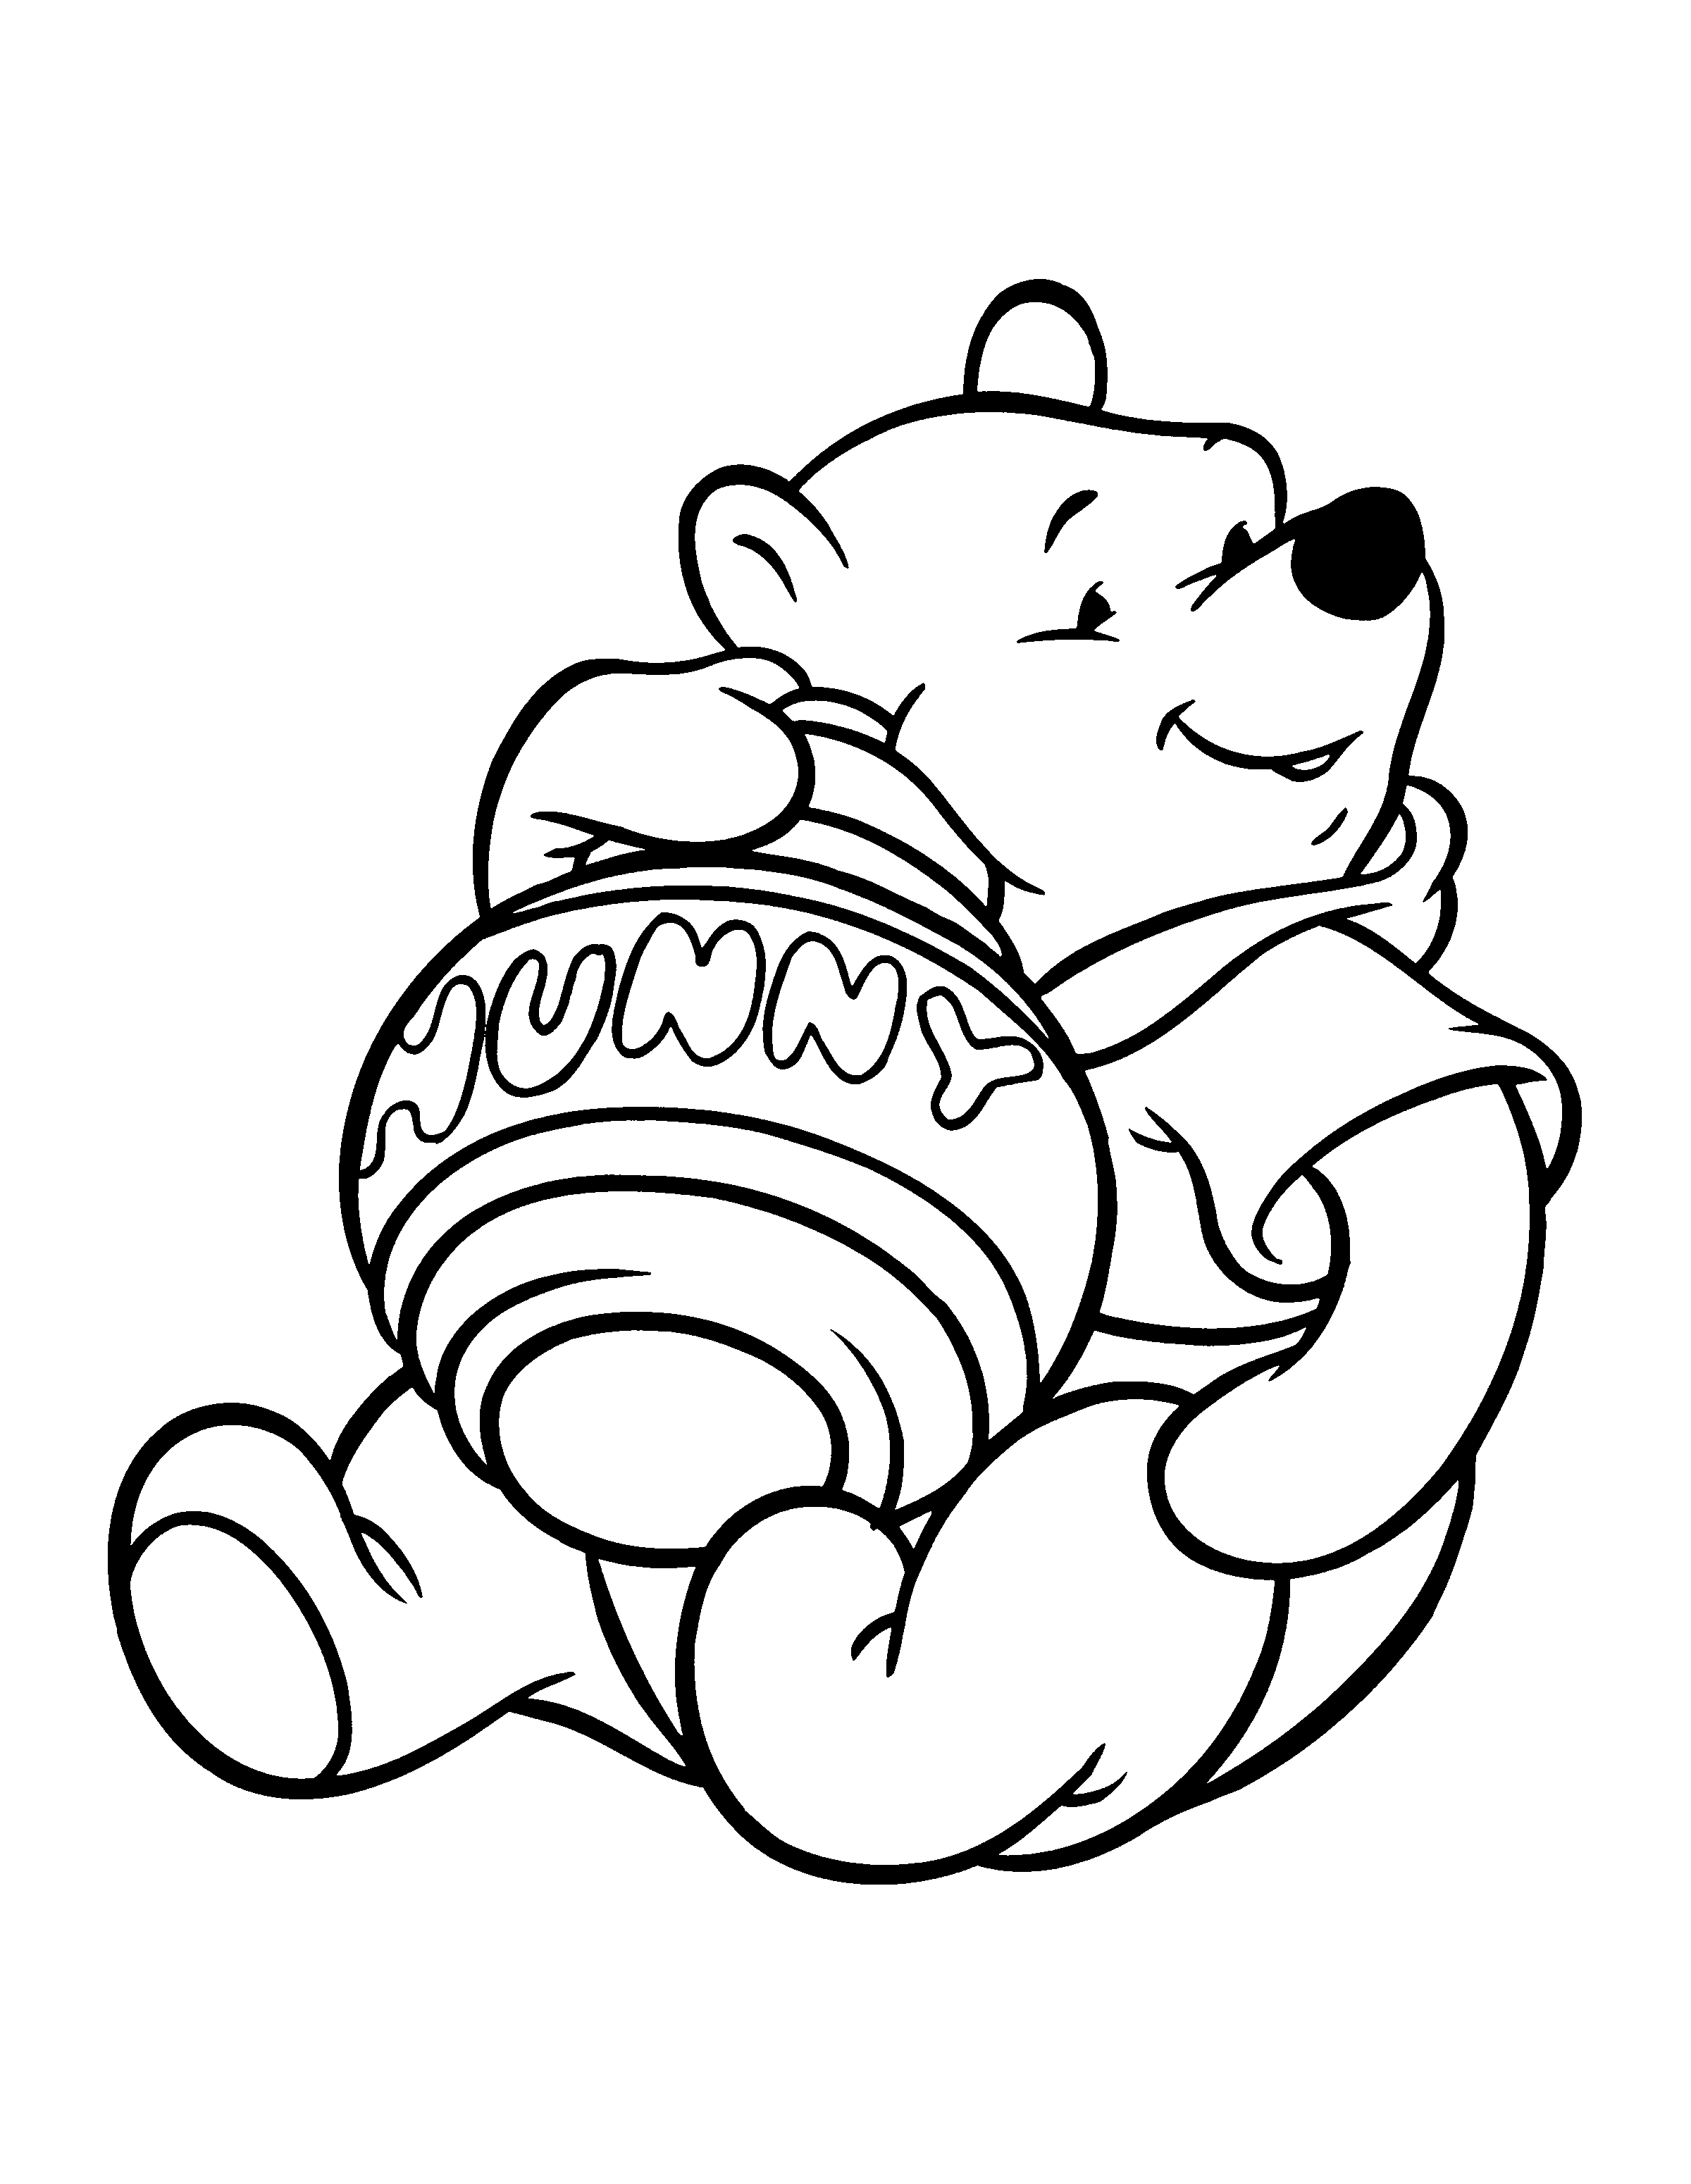 Coloring Page - Winnie the pooh coloring pages 74